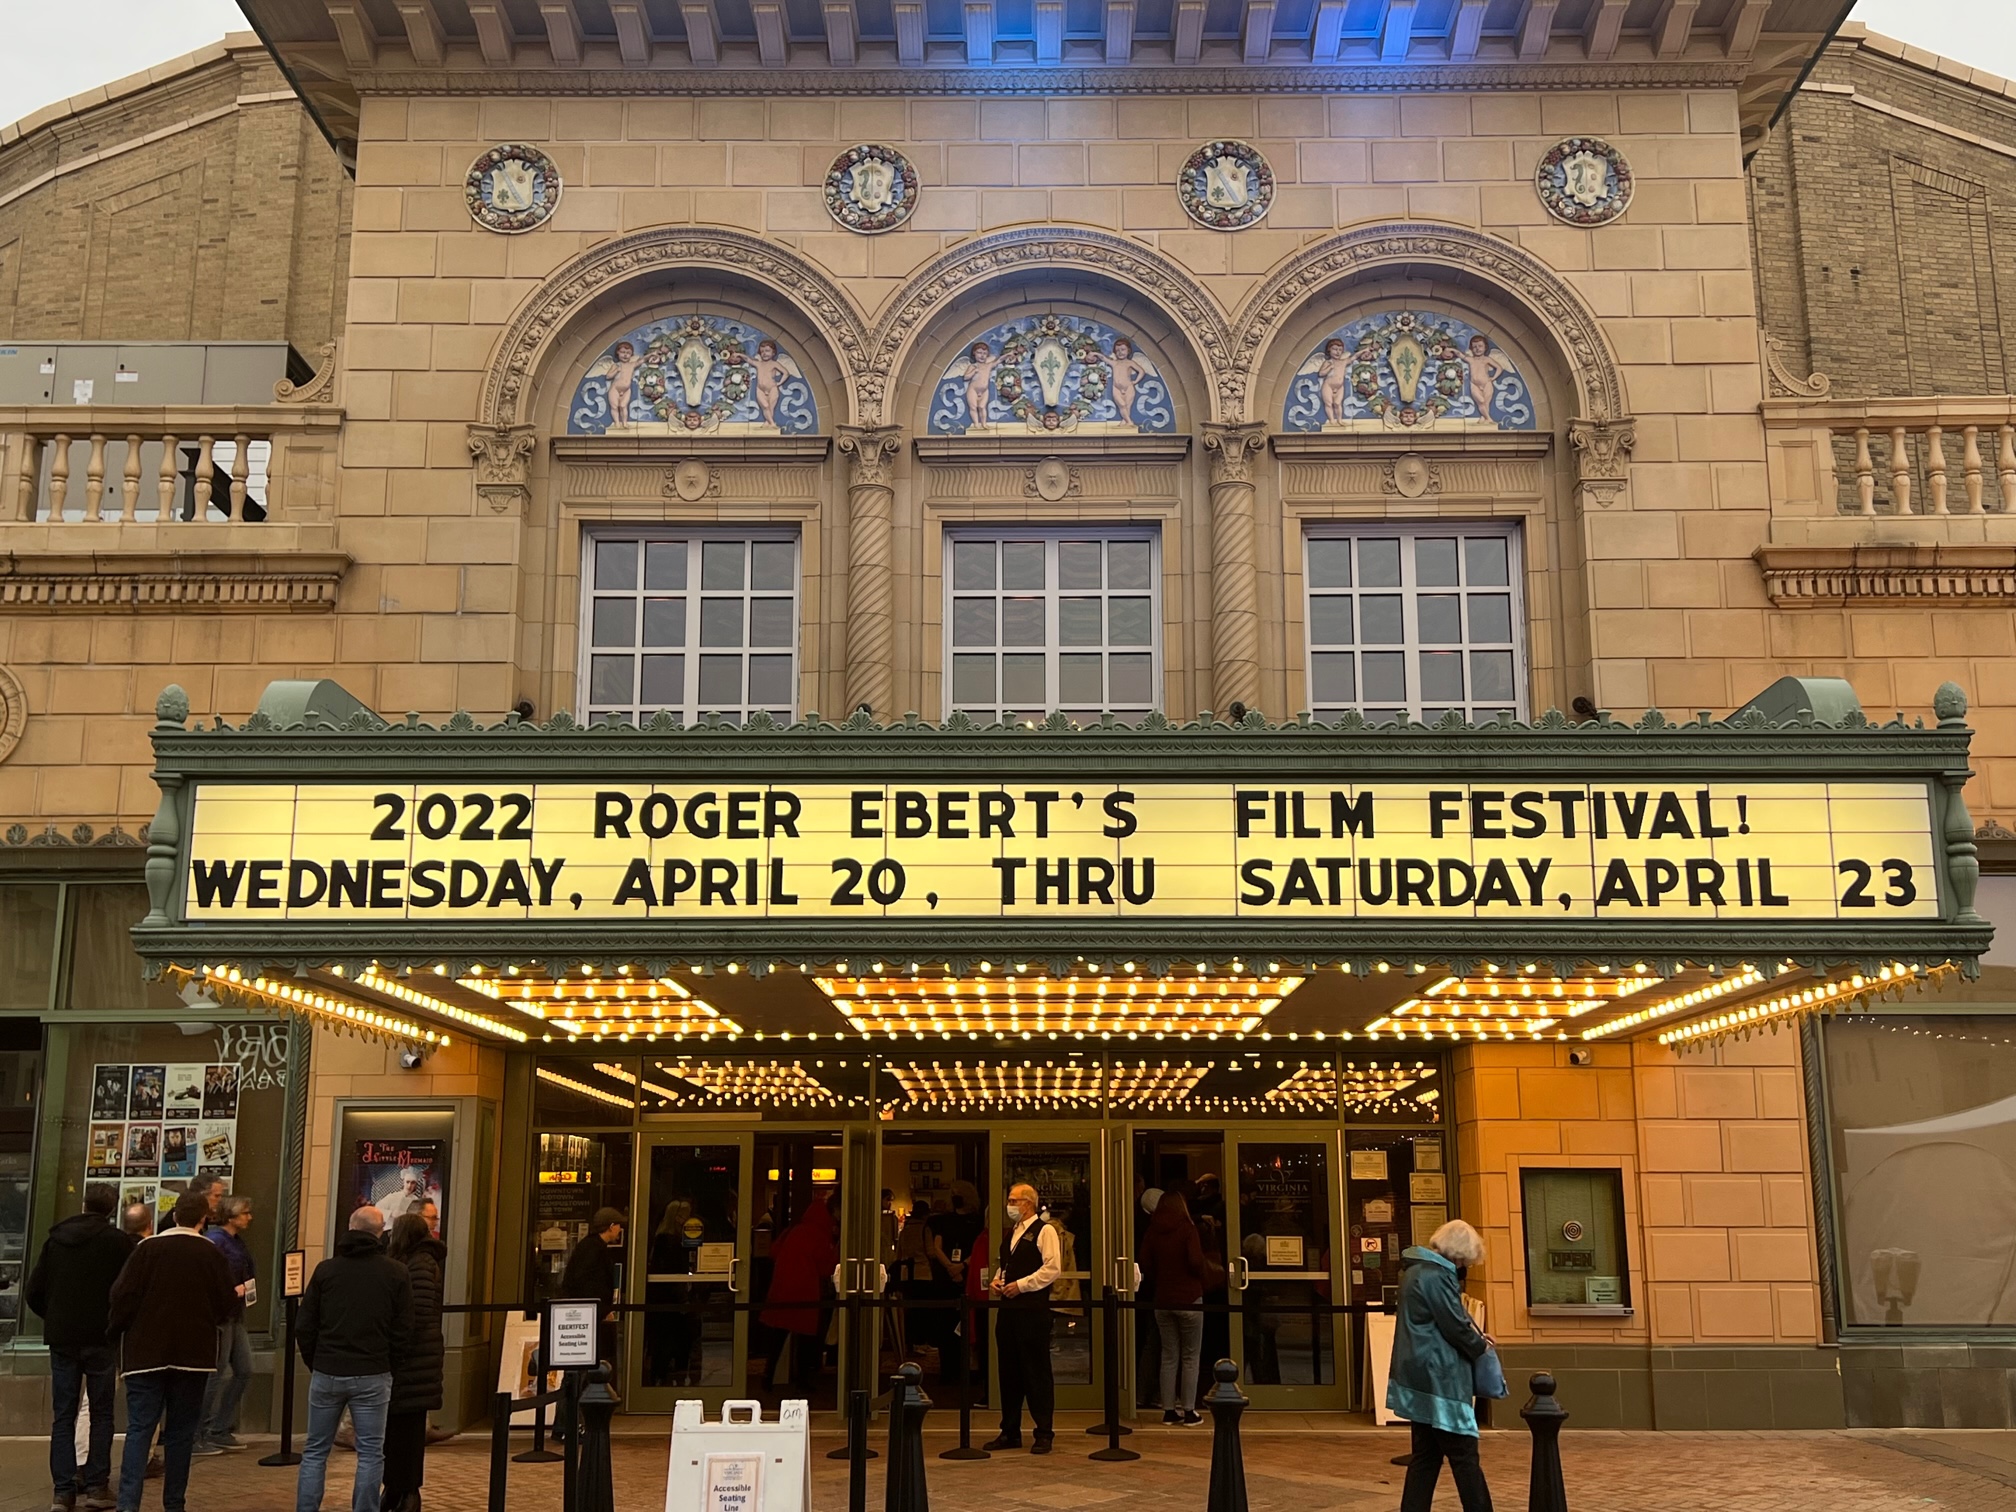 We went to Ebertfest 2022 and here’s what happened